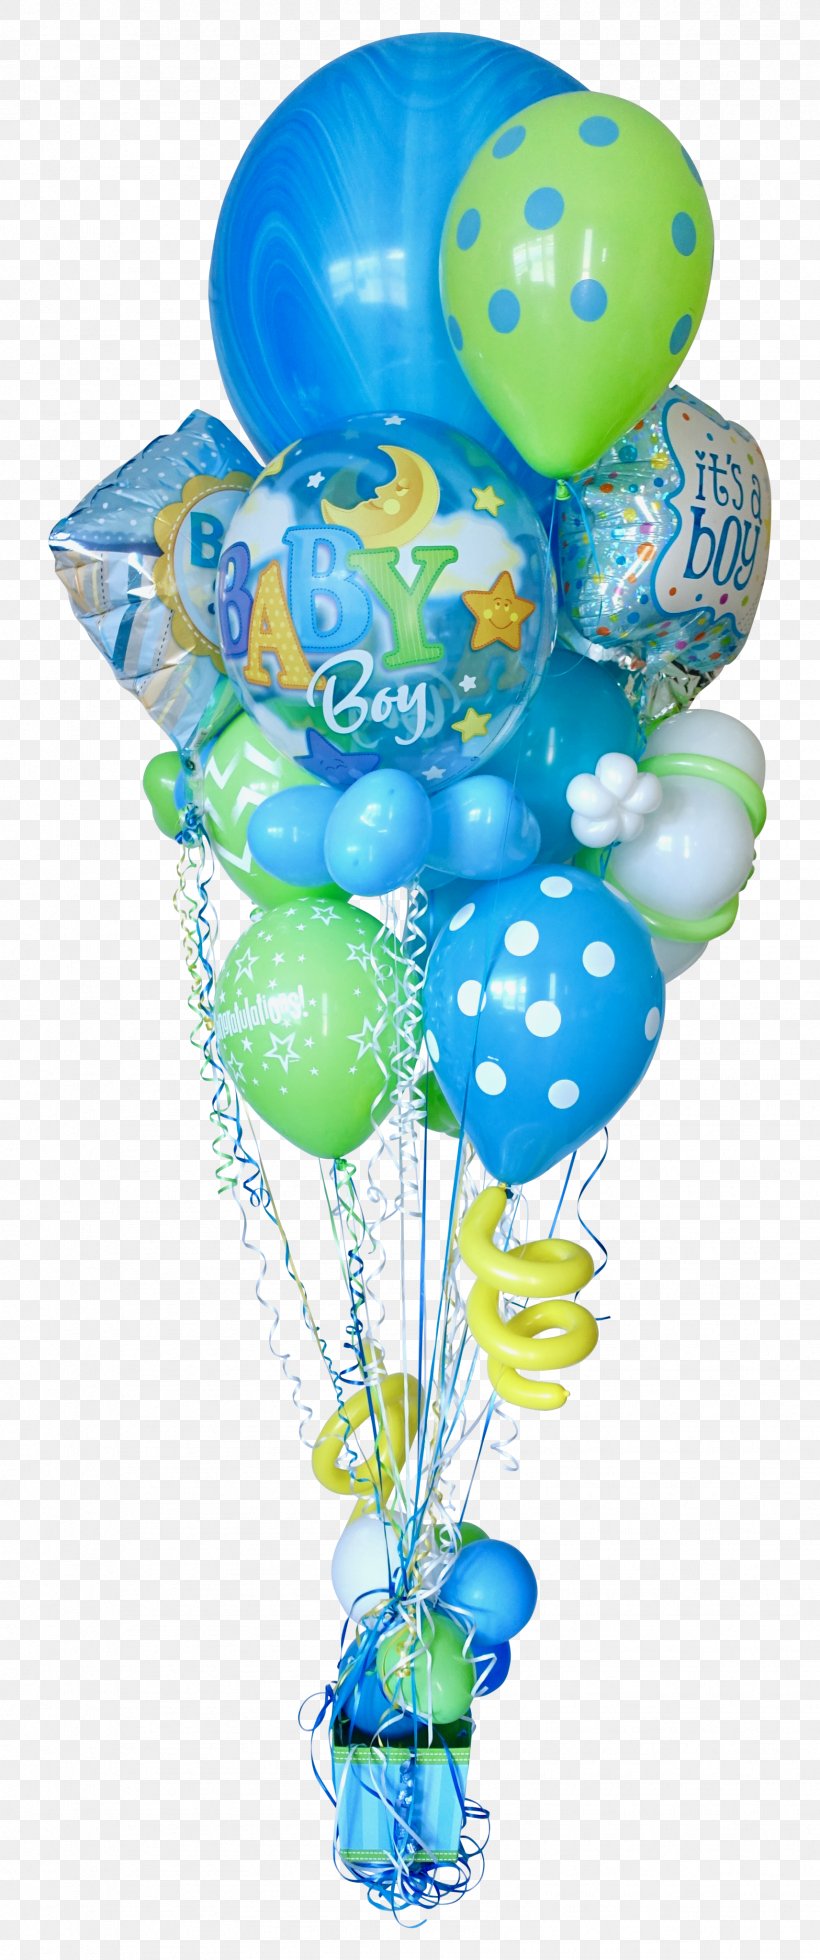 Toy Balloon Microsoft Azure Turquoise Party, PNG, 1713x4096px, Toy, Balloon, Microsoft Azure, Party, Party Supply Download Free